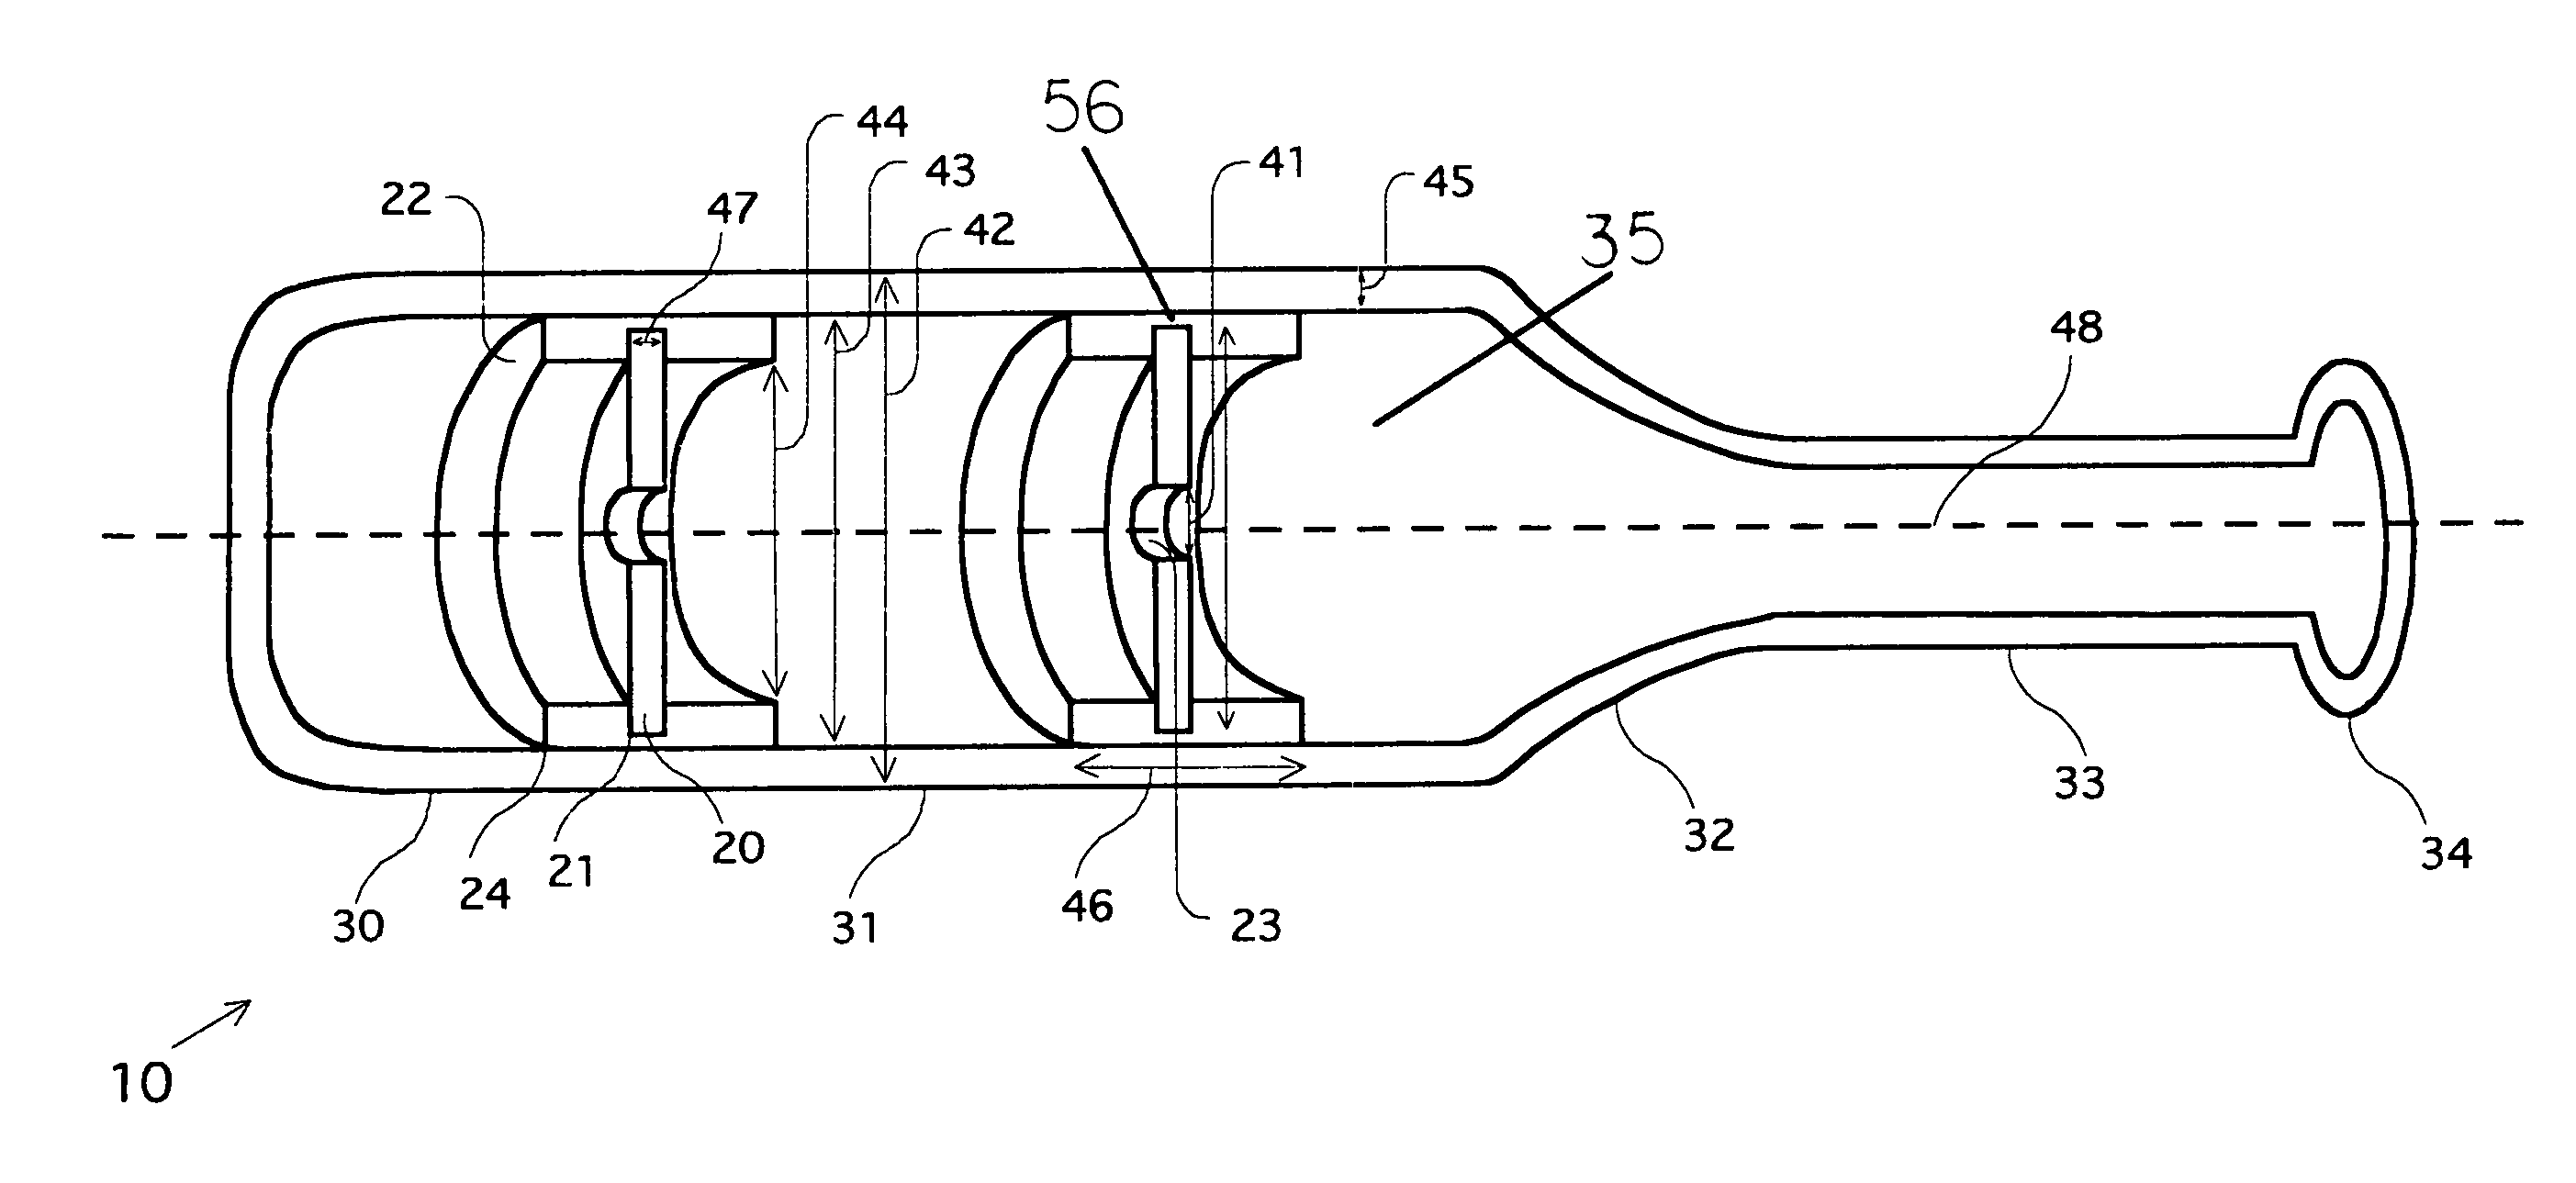 Apparatus for deterring modification of sports equipment